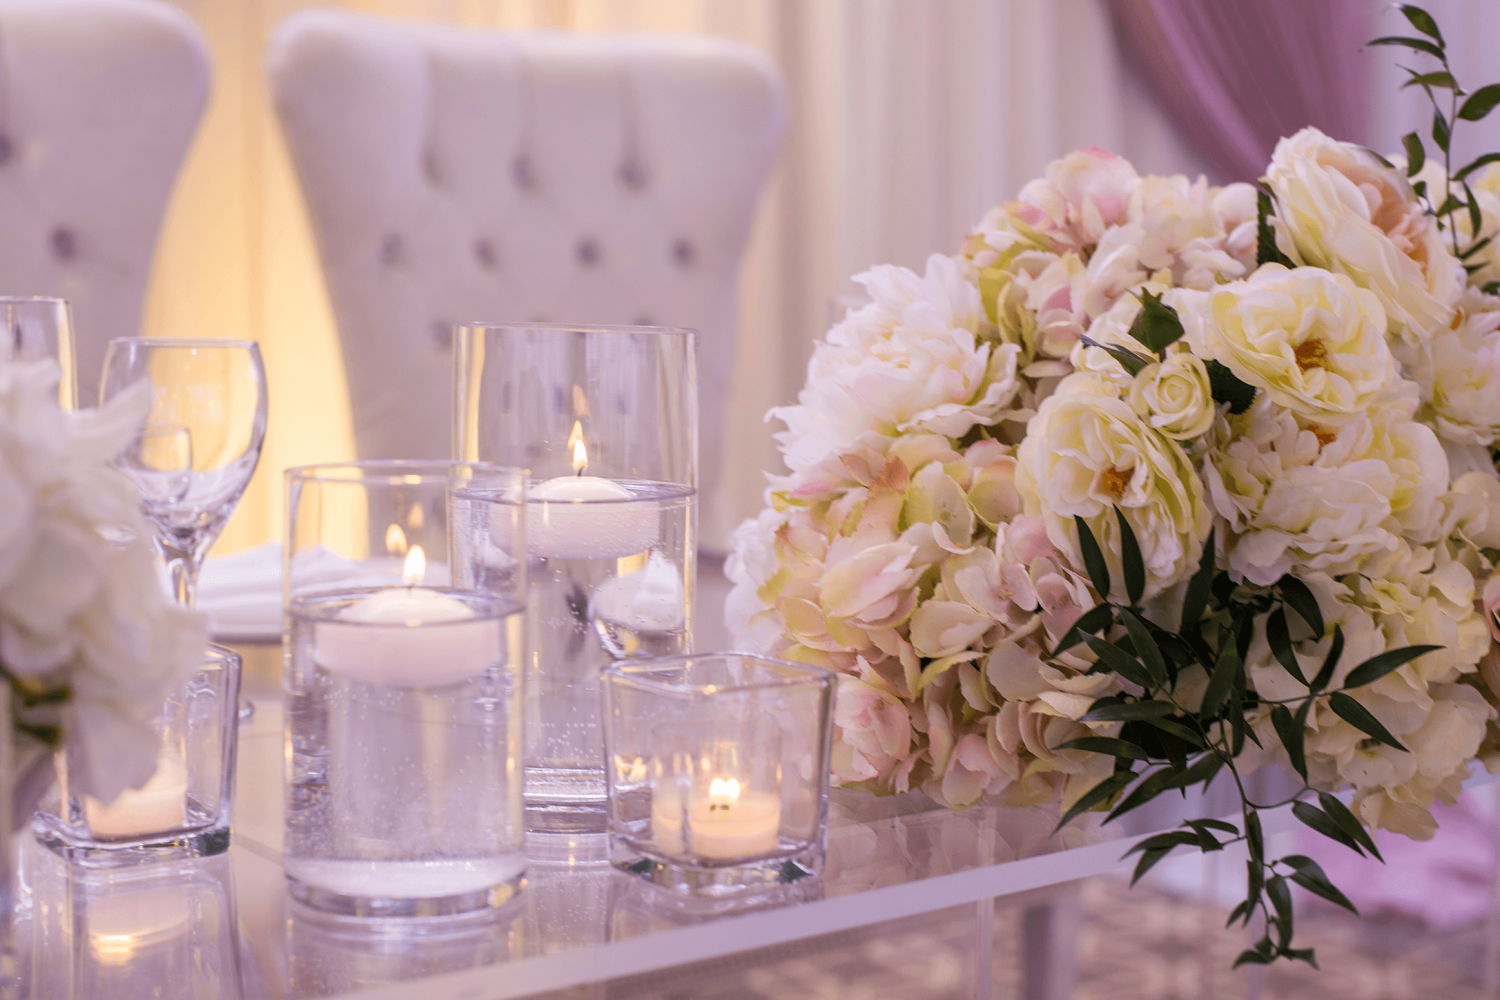 A close-up of a bouquet of flowers at the head table with candles and large, white chairs.